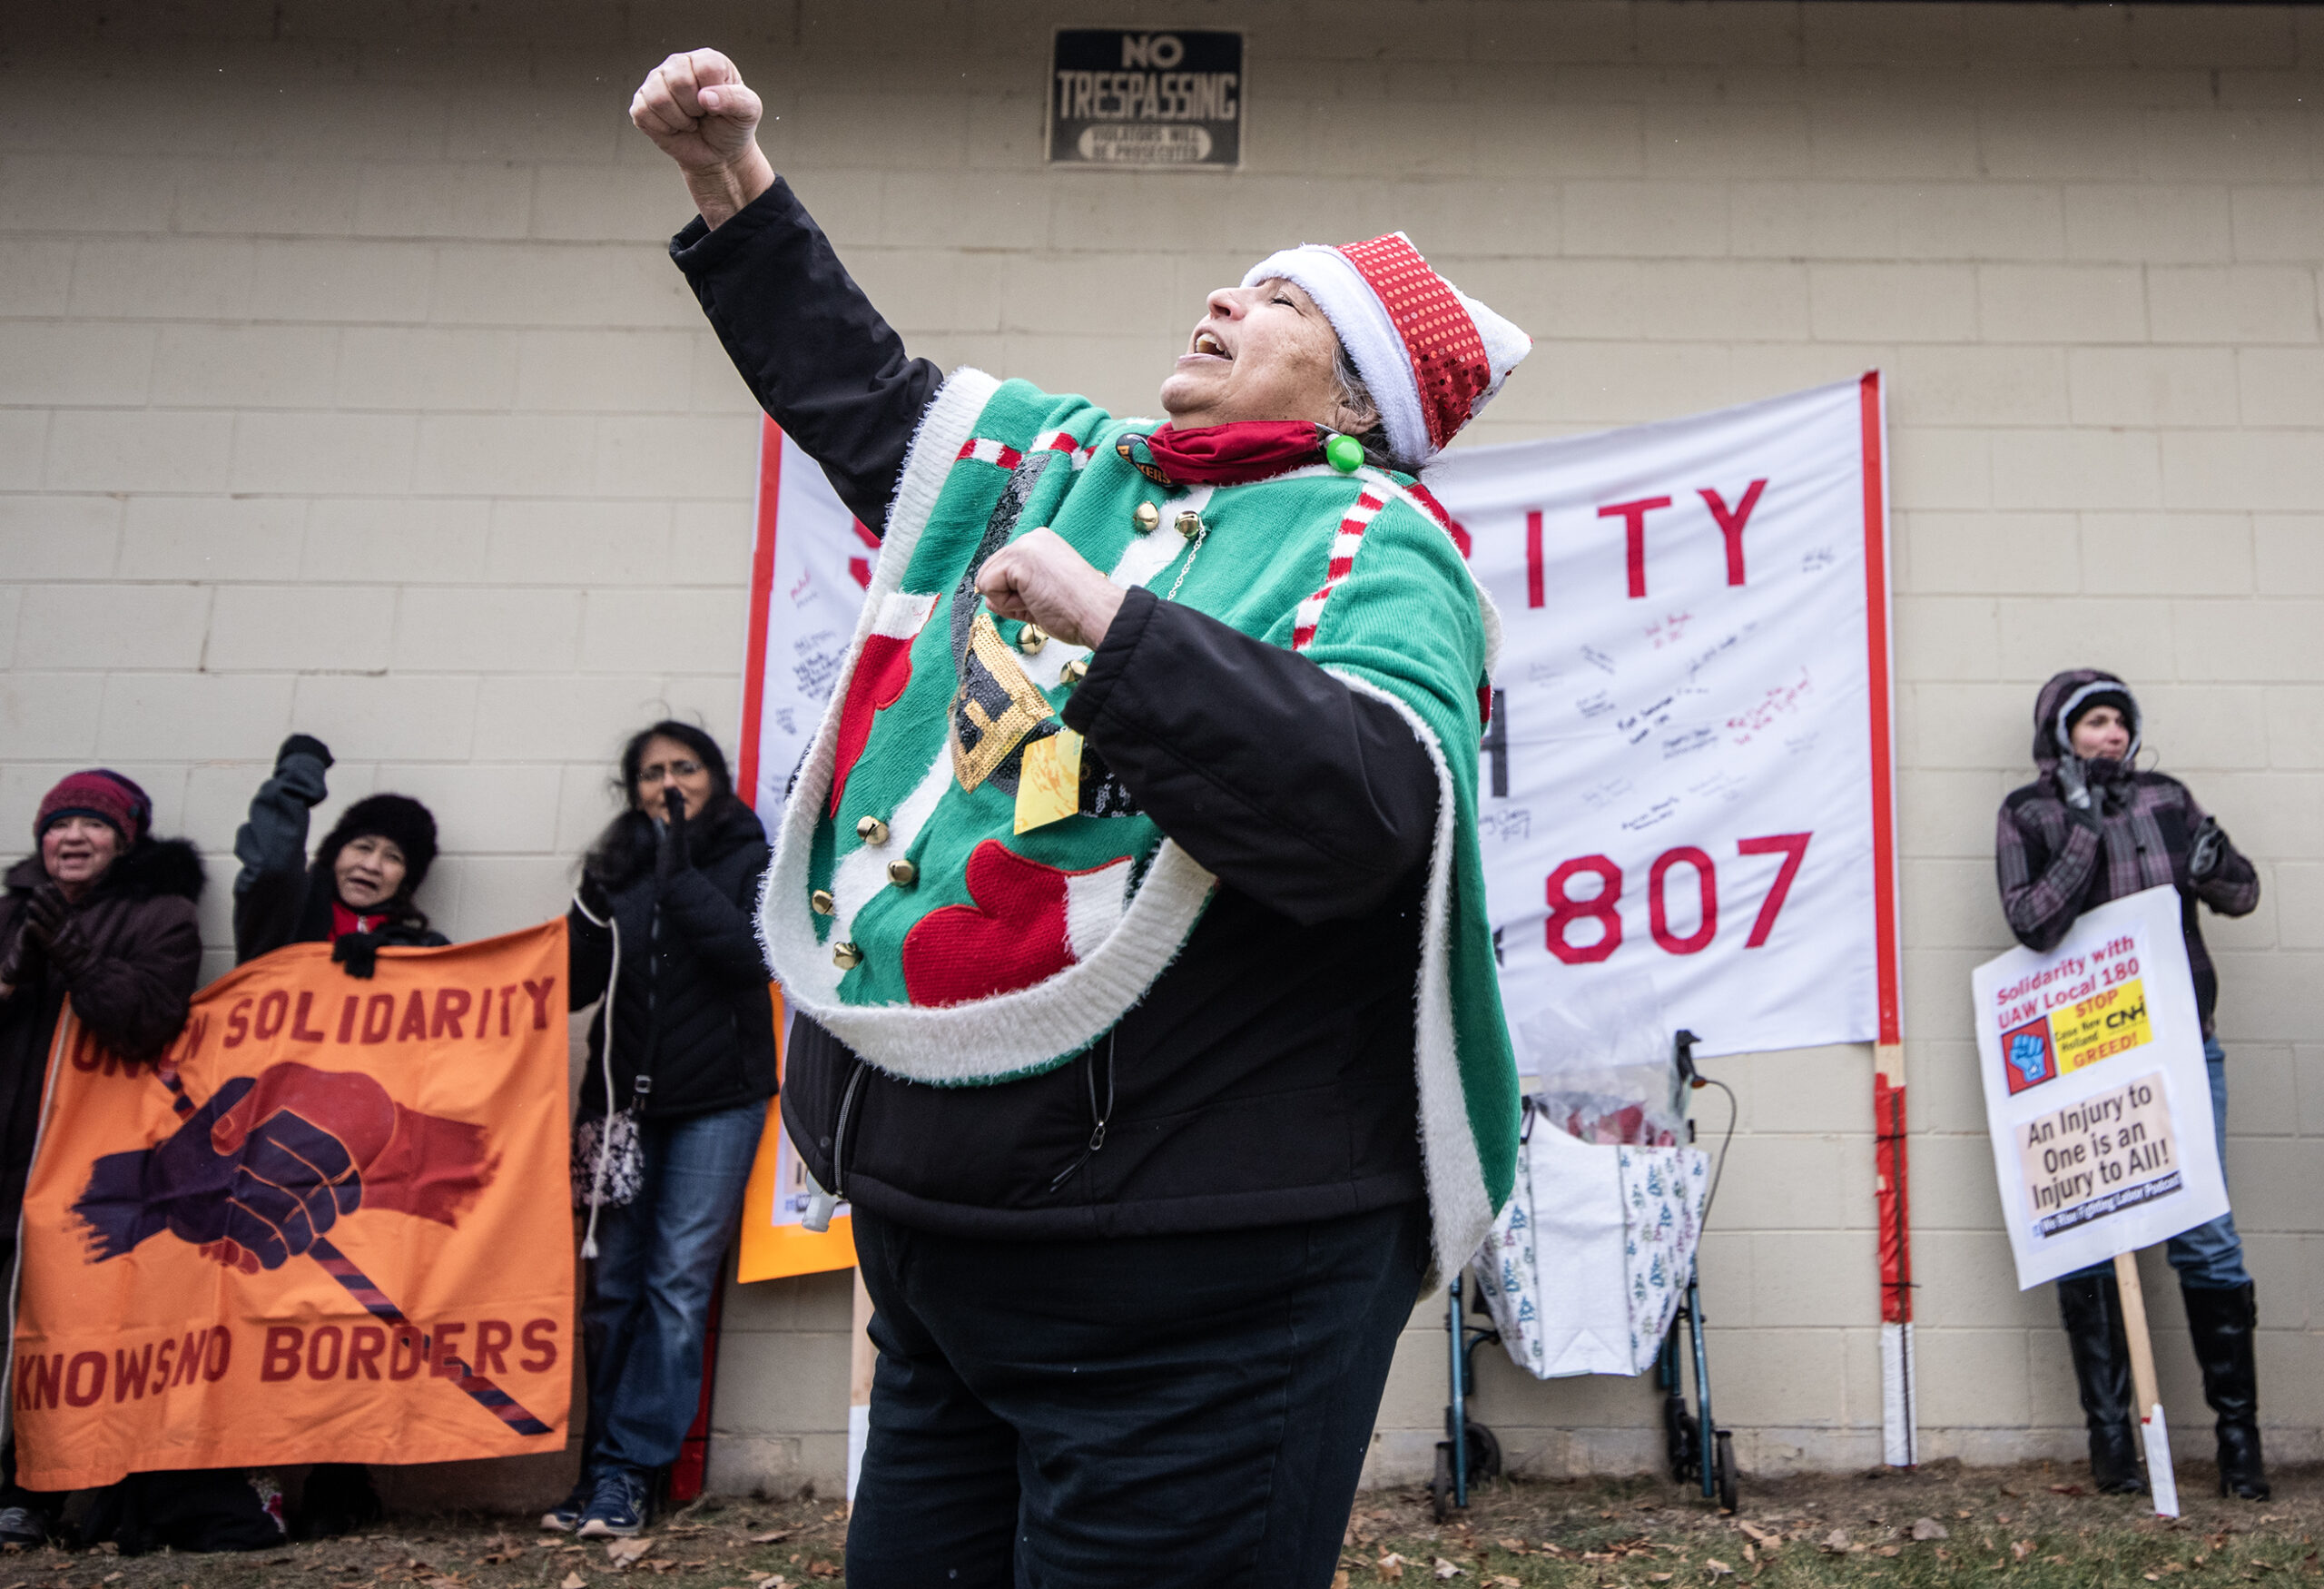 A woman in a Christmas themed outfit raises her fist while speaking to the rally.